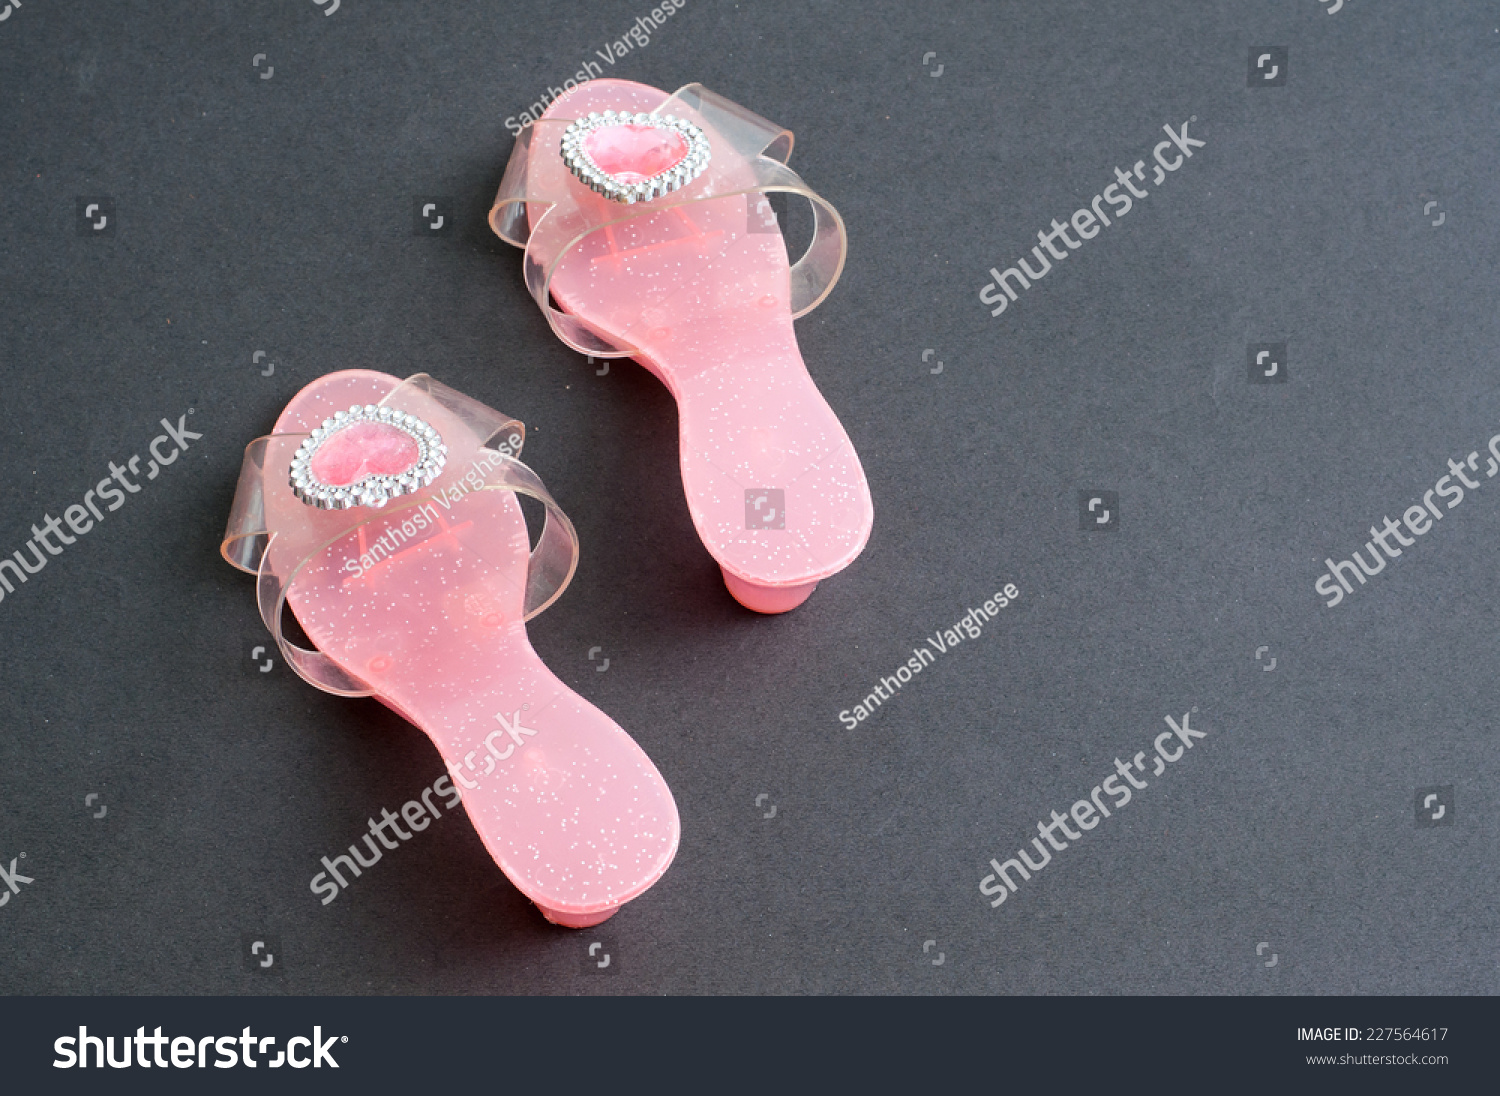 Footwear For Girls Pink High Heel Shoes For Royalty Free Stock Photo Avopix Com